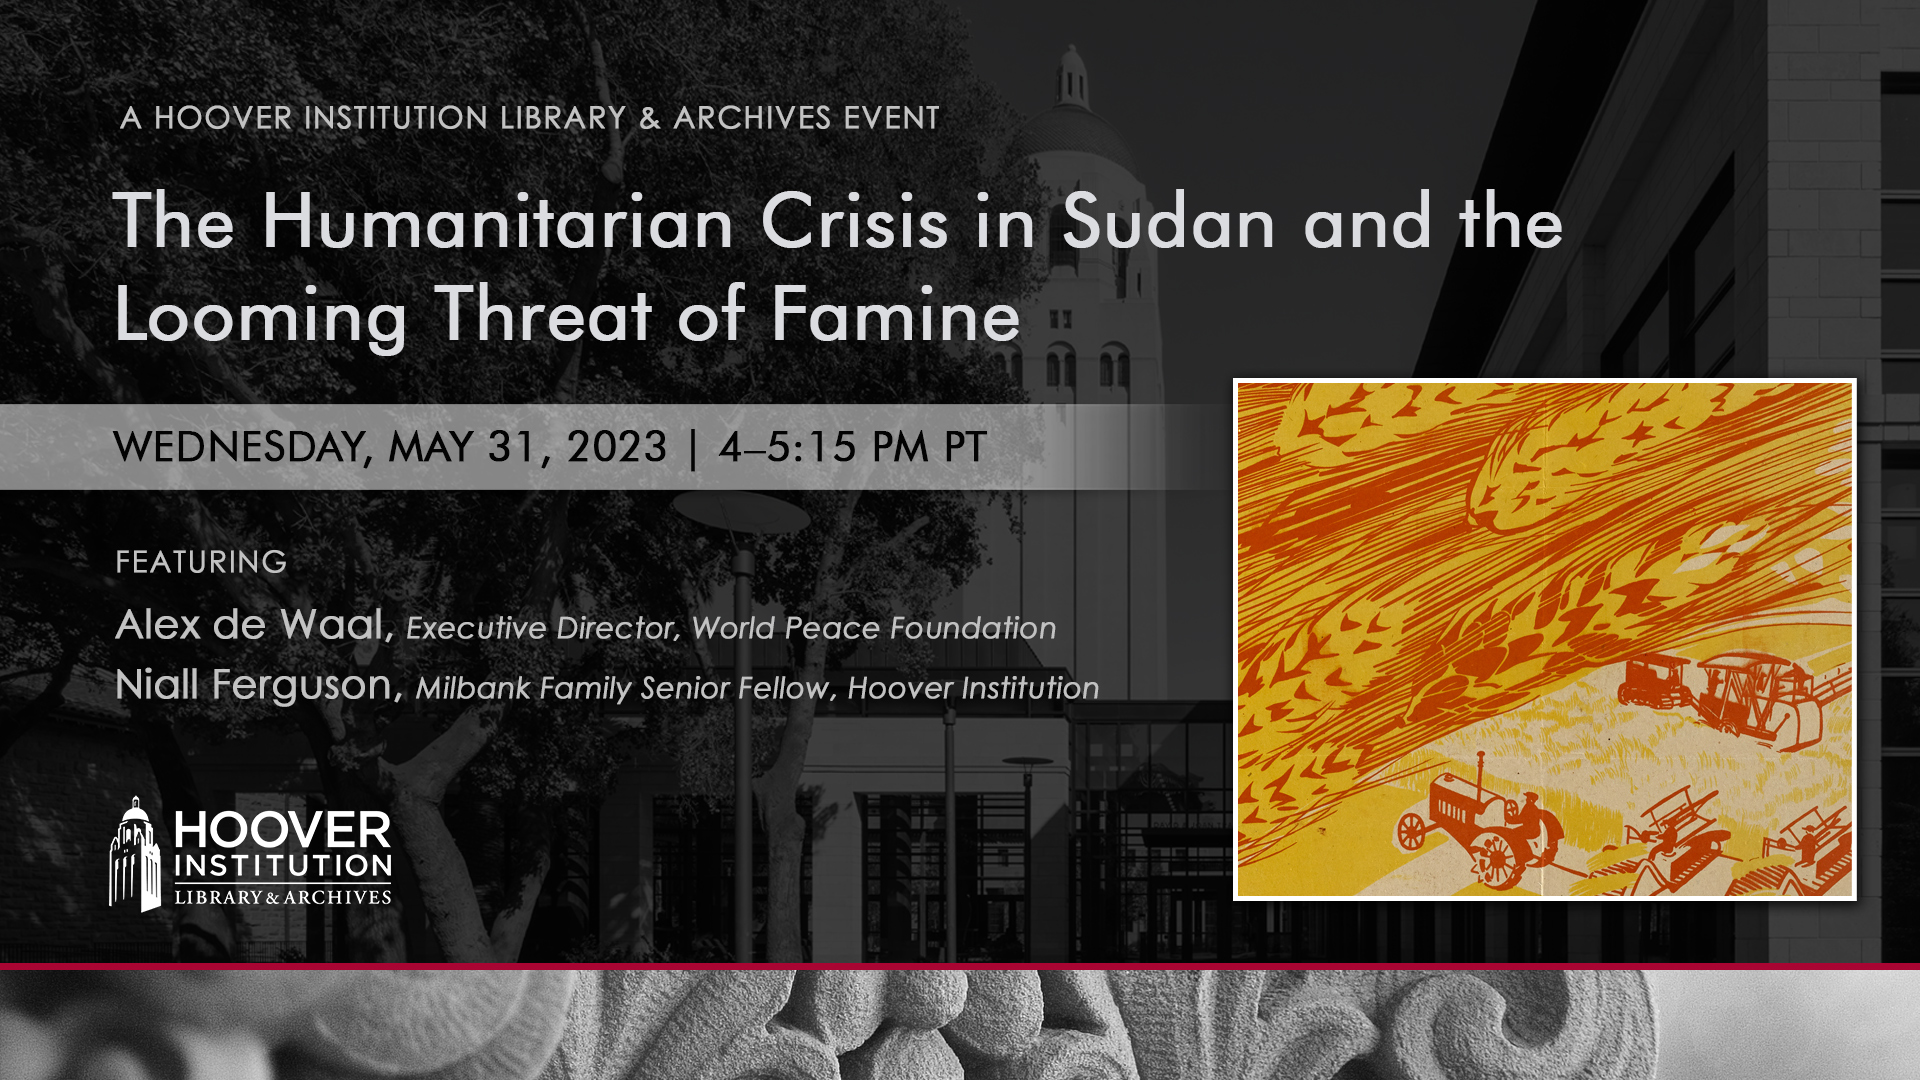 Opening Slide for Humanitarian Crisis in Sudan and Looming Threat of Famine